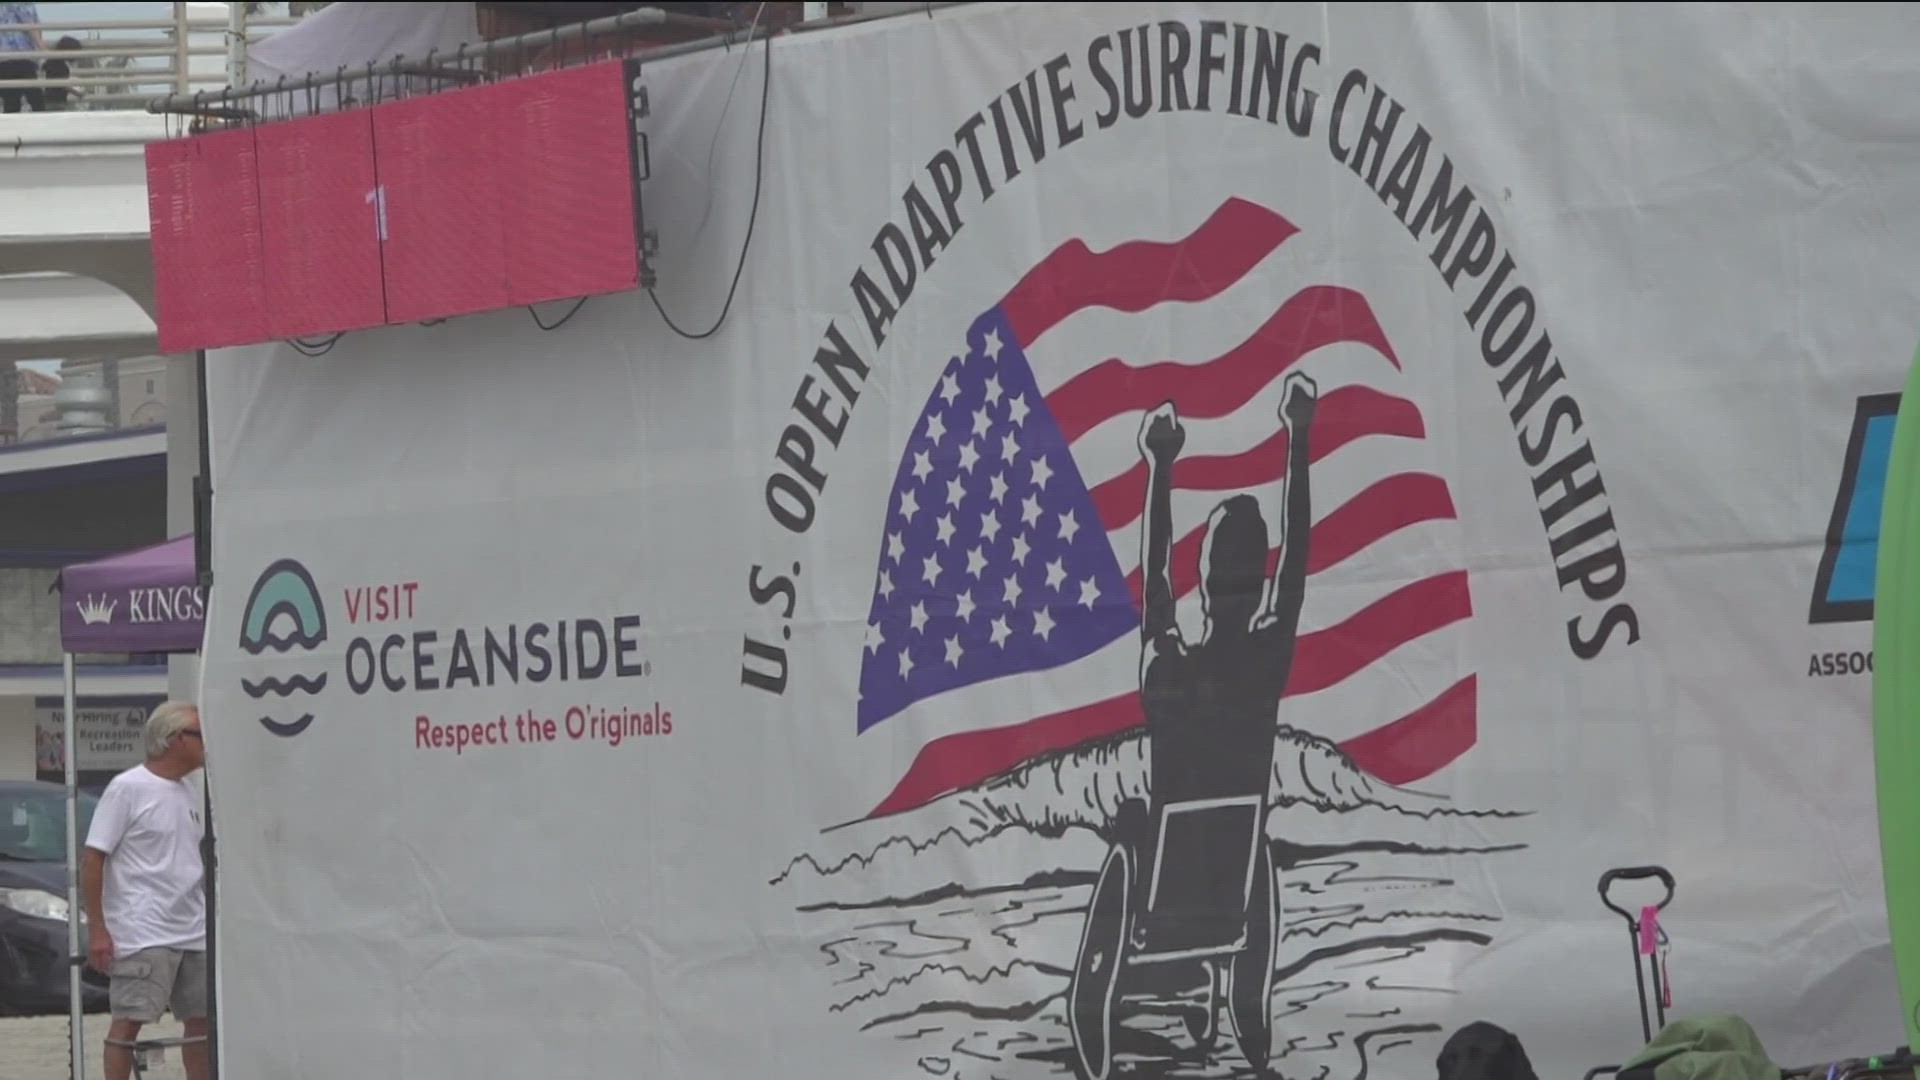 Close to 100 competitors attended the 6th Annual Open Adaptive Surfing Championships cbs8